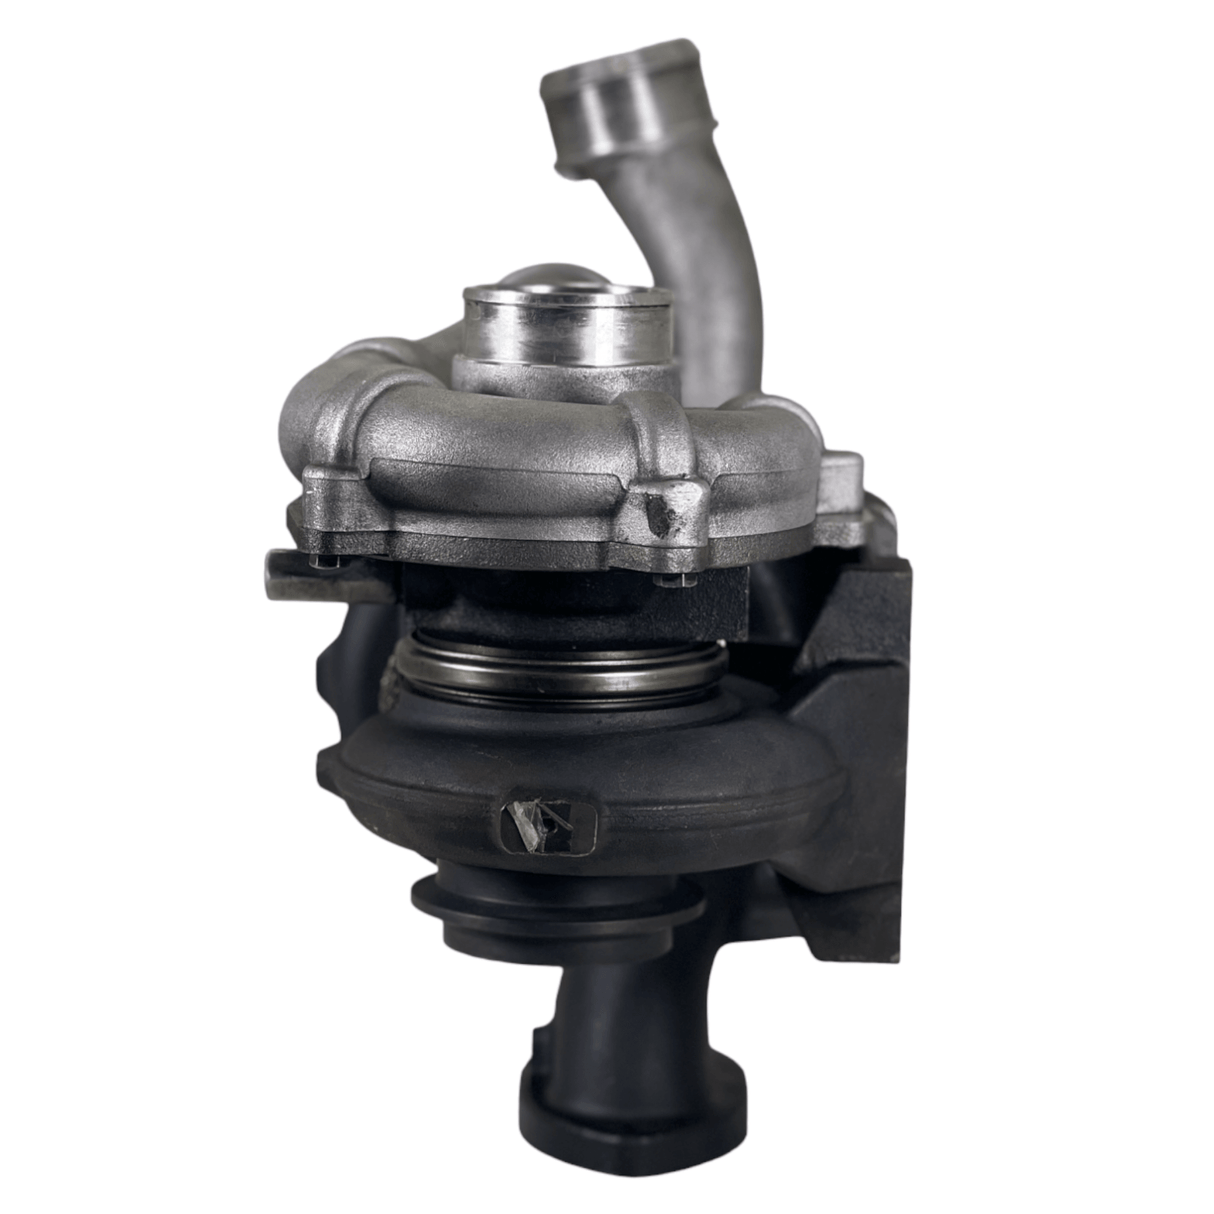 R864104T Rotomaster® Rtm Turbocharger W/ Actuator High / Low Pressure For Ford.